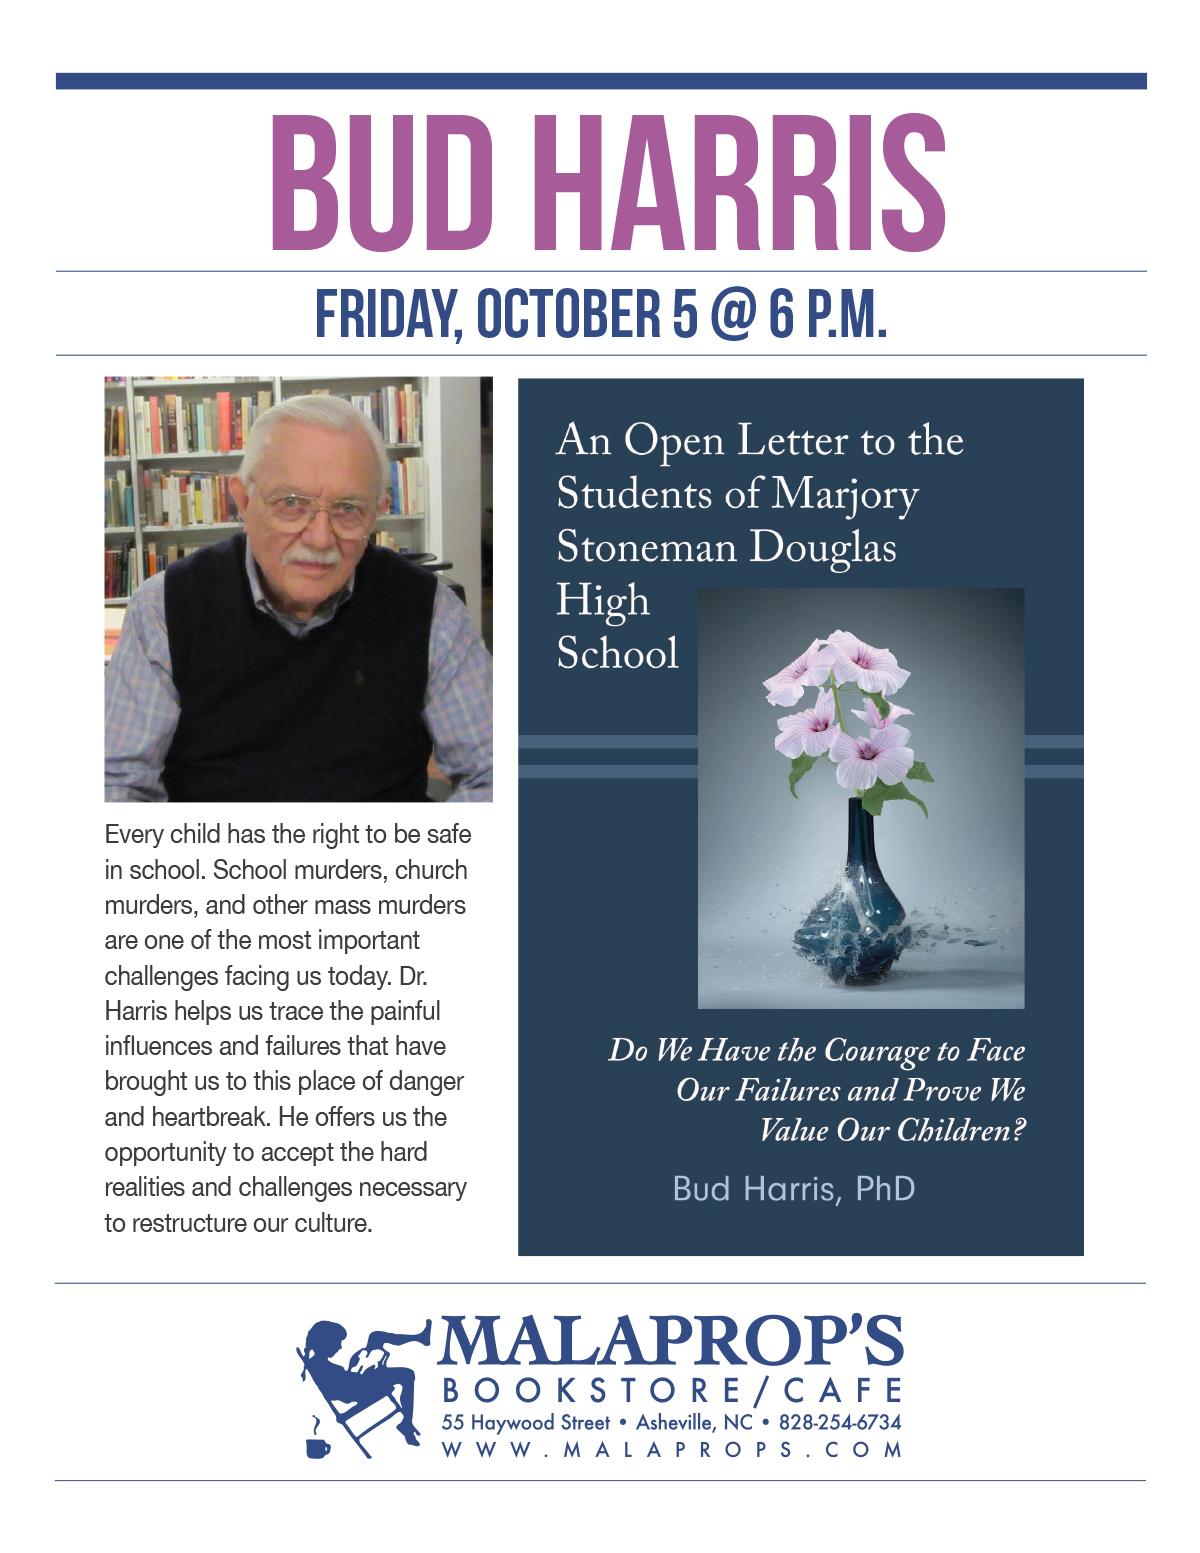 Bud Harris PhD presents his new book at Malaprop's Bookstore in Asheville